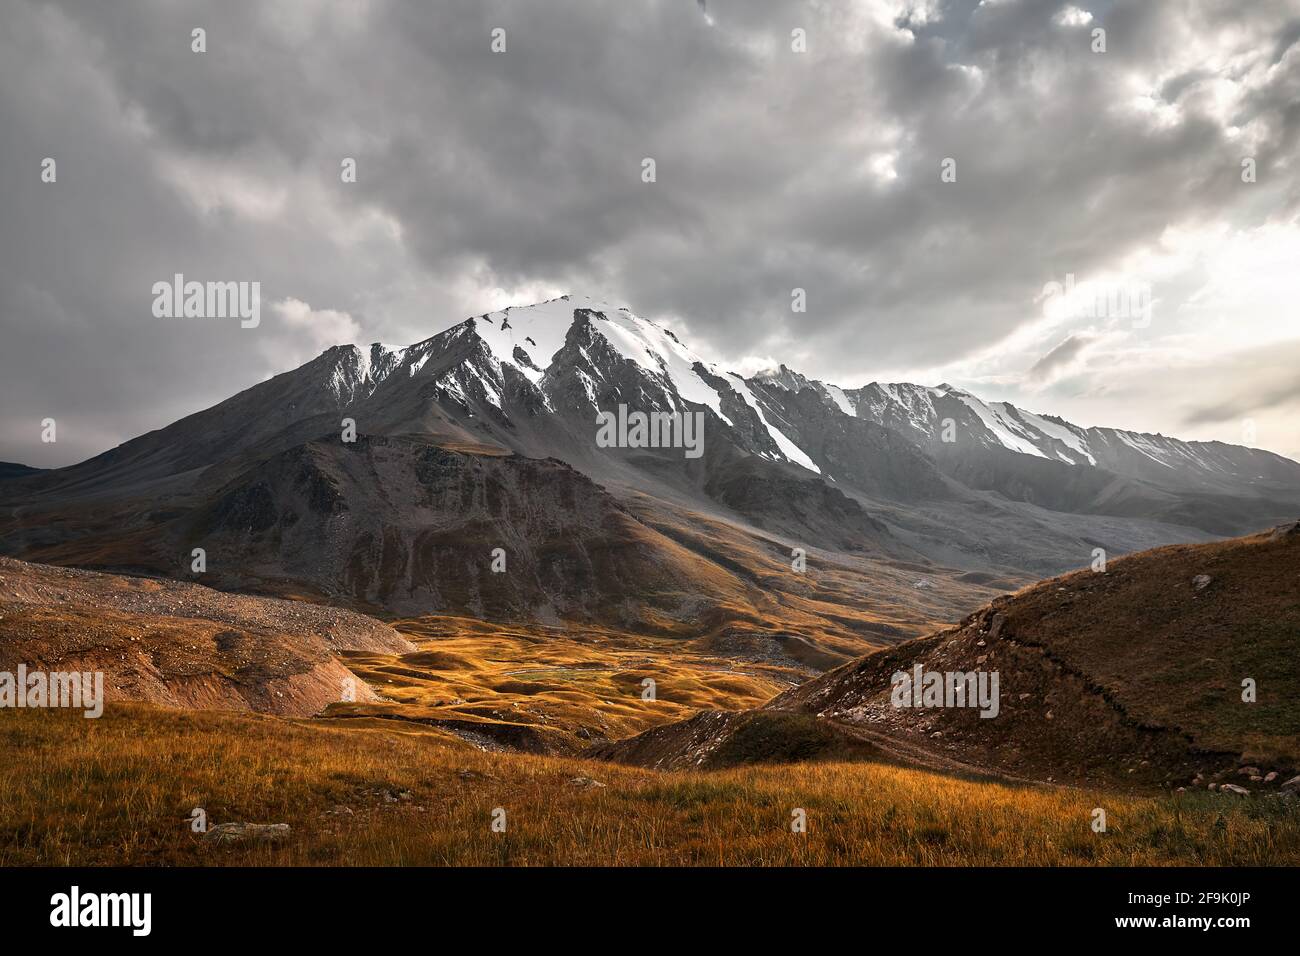 Landscape of beautiful summit in Tian Shan Mountains Valley at sunset in Almaty, Kazakhstan Stock Photo